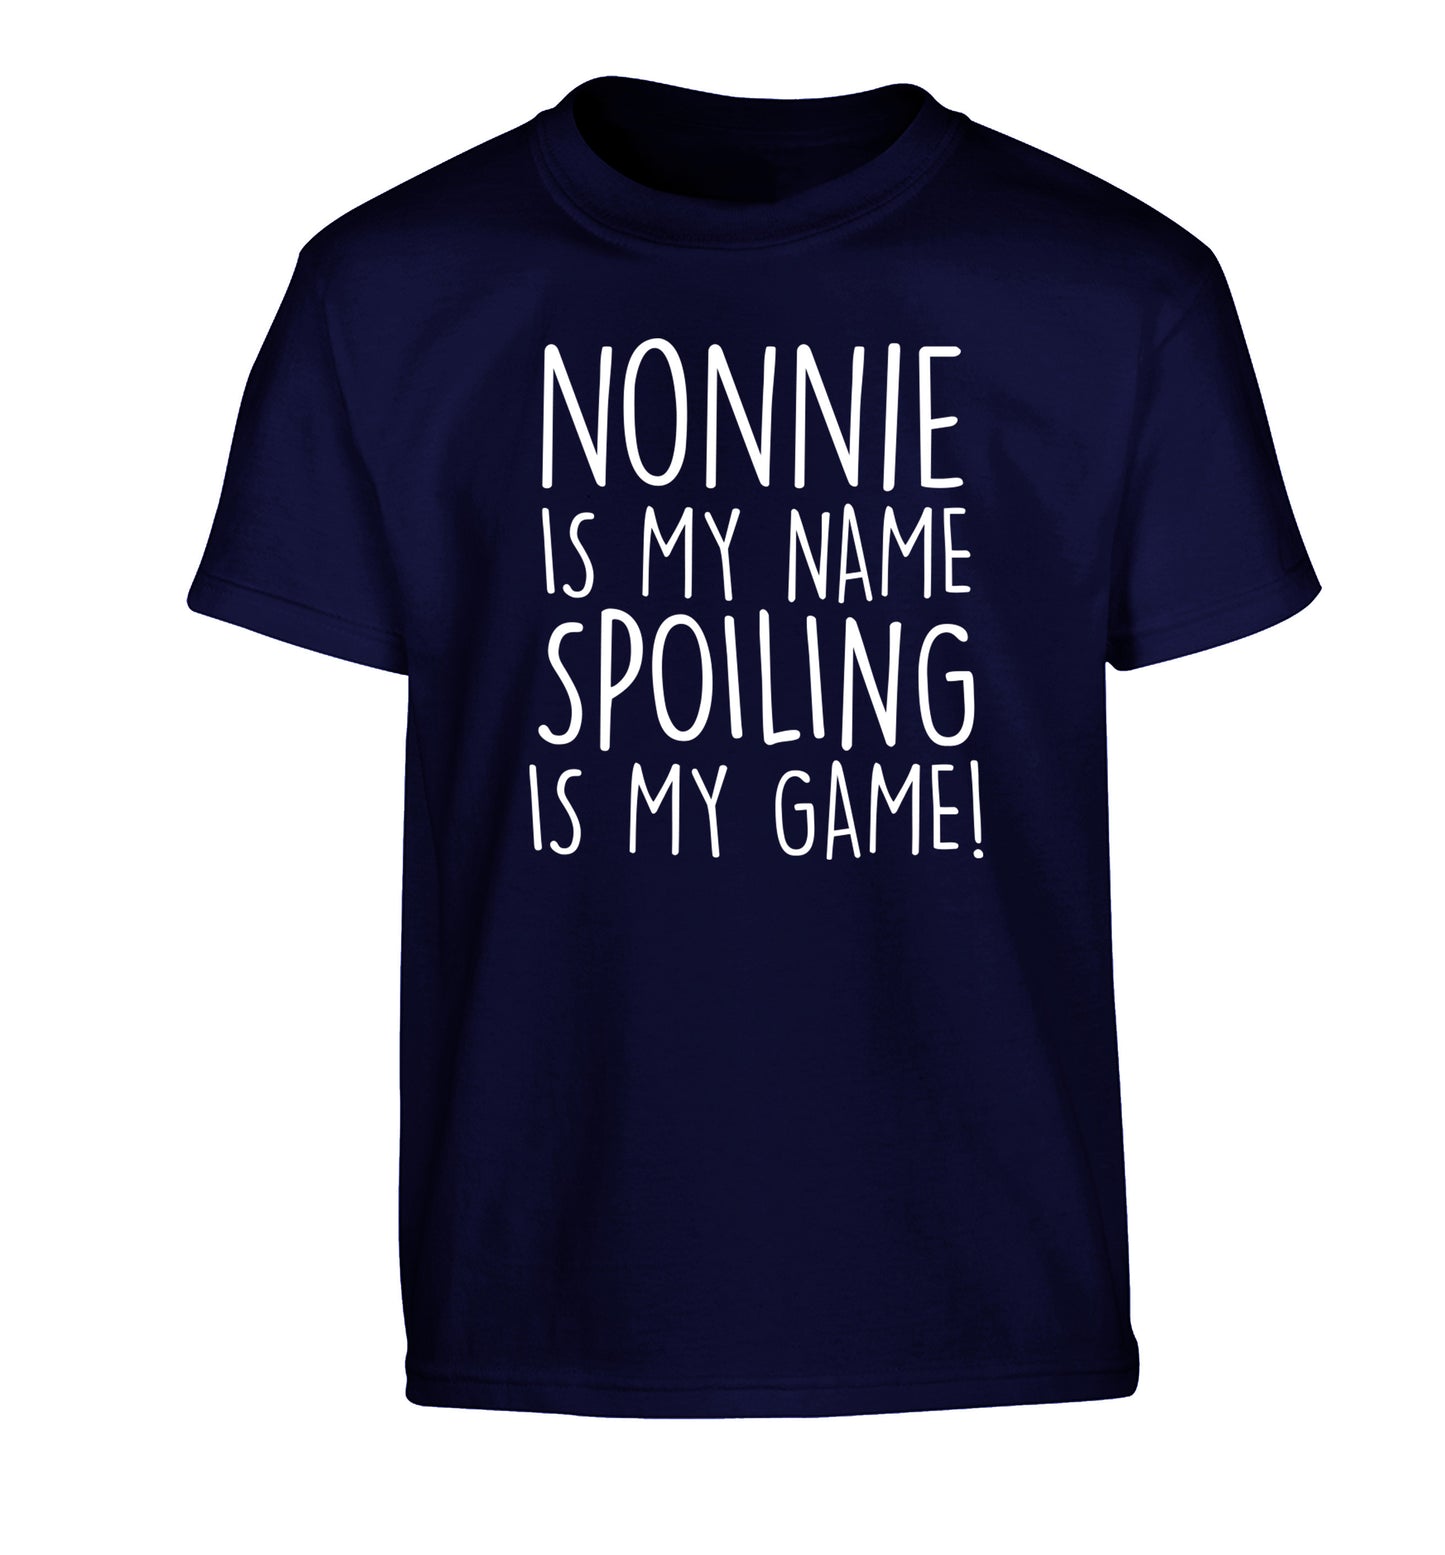 Nonnie is my name, spoiling is my game Children's navy Tshirt 12-14 Years